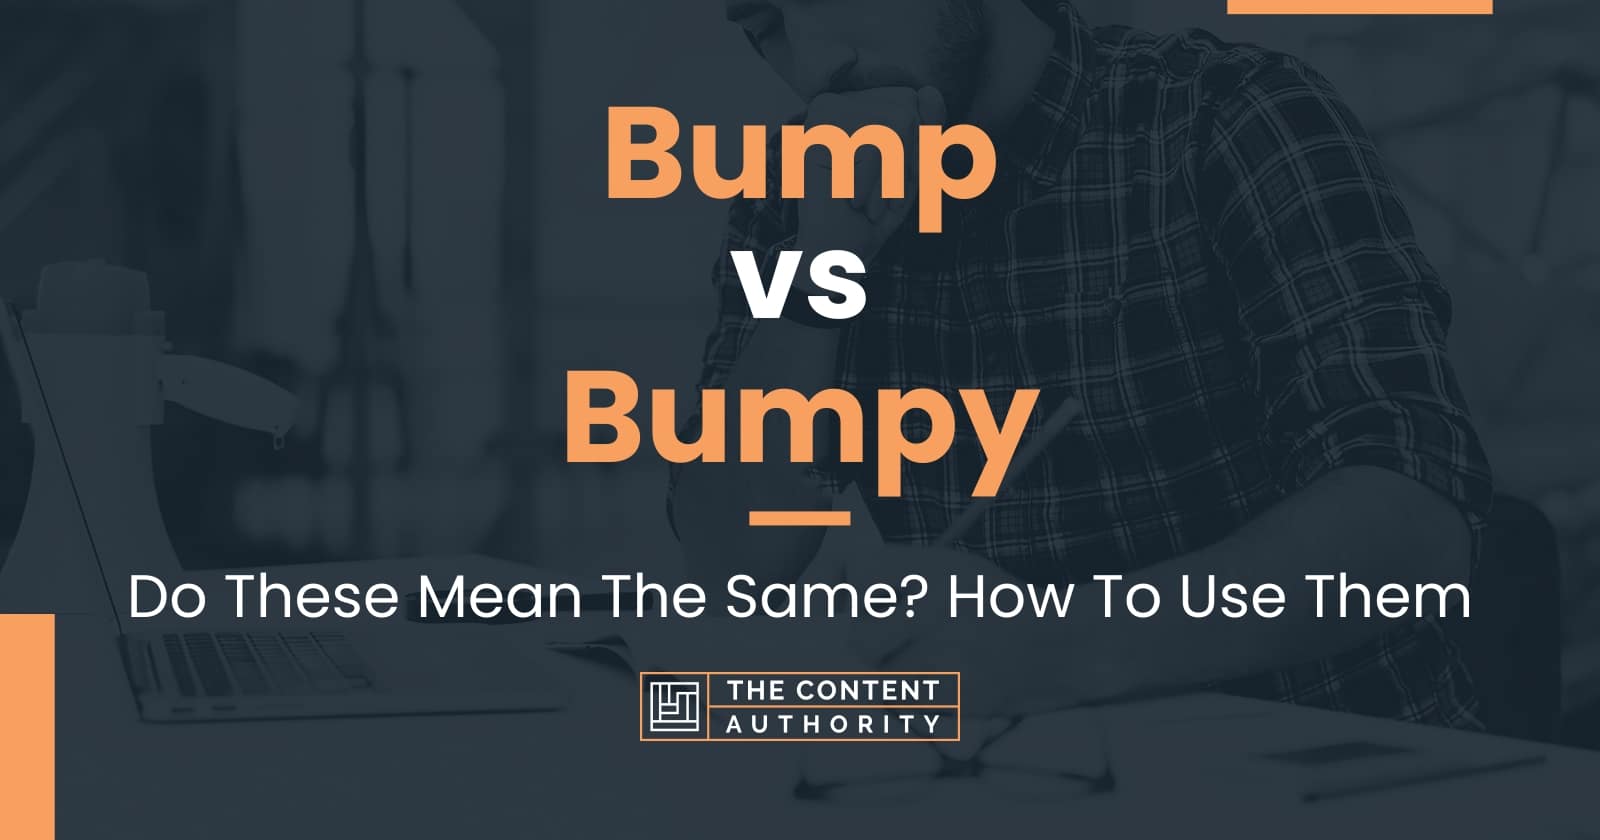 Bump vs Bumpy: Do These Mean The Same? How To Use Them